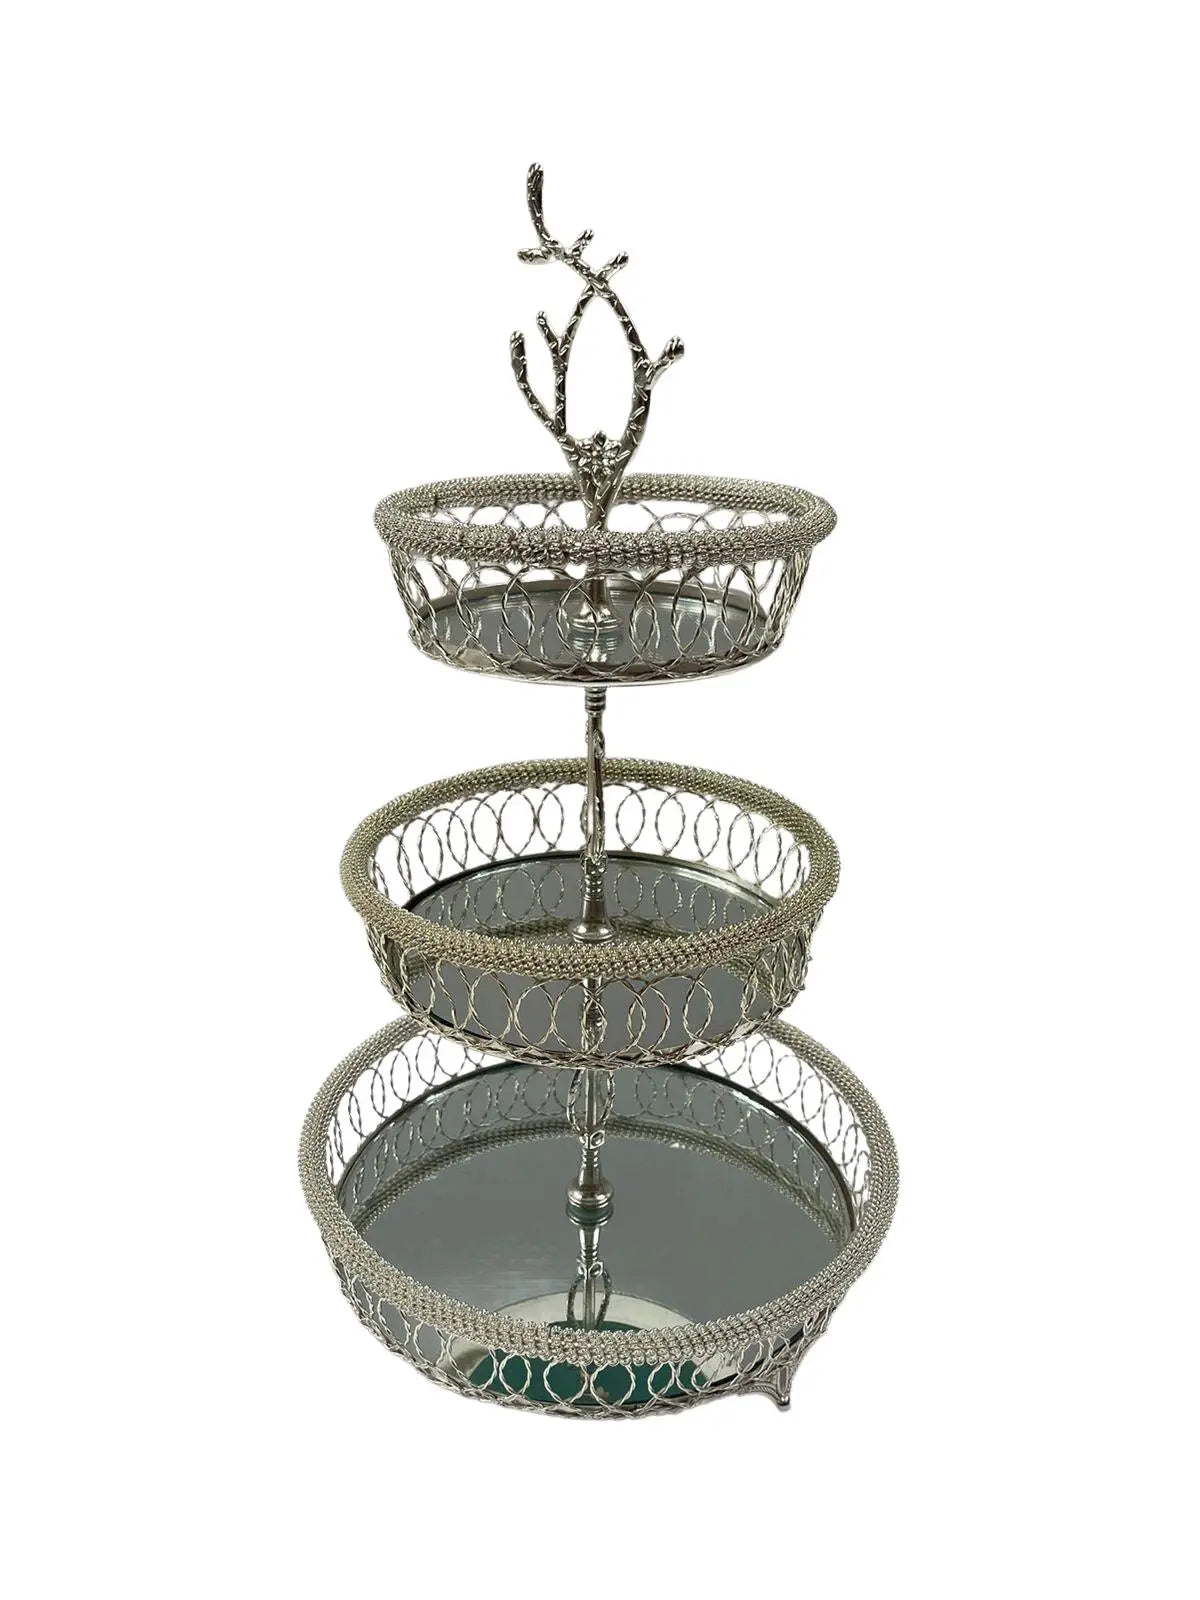 3 Tier Centre Post Ornate Mirrored Round Serving Tray -  Maher -  Armani Gallery